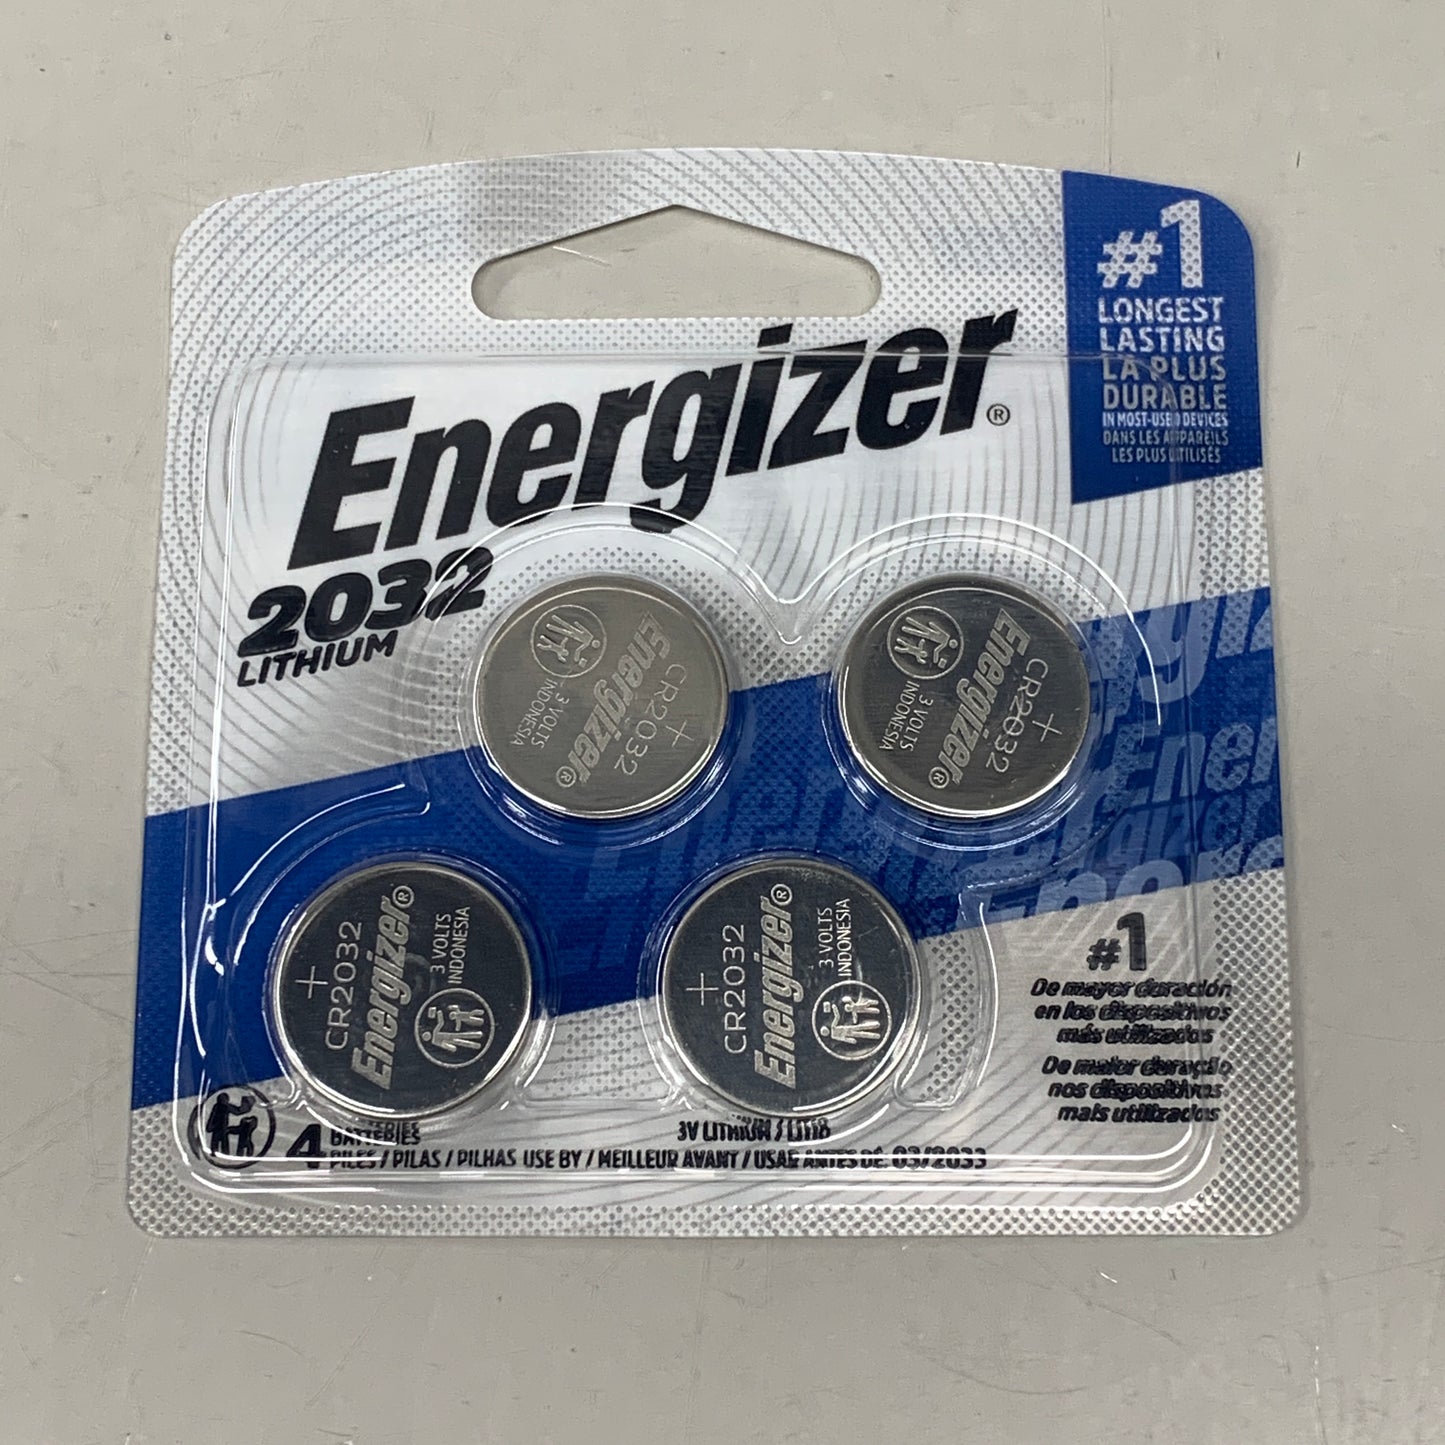 ENERGIZER (8 BATTERIES) 2032 Lithium Coin Battery for Key FOB 851179